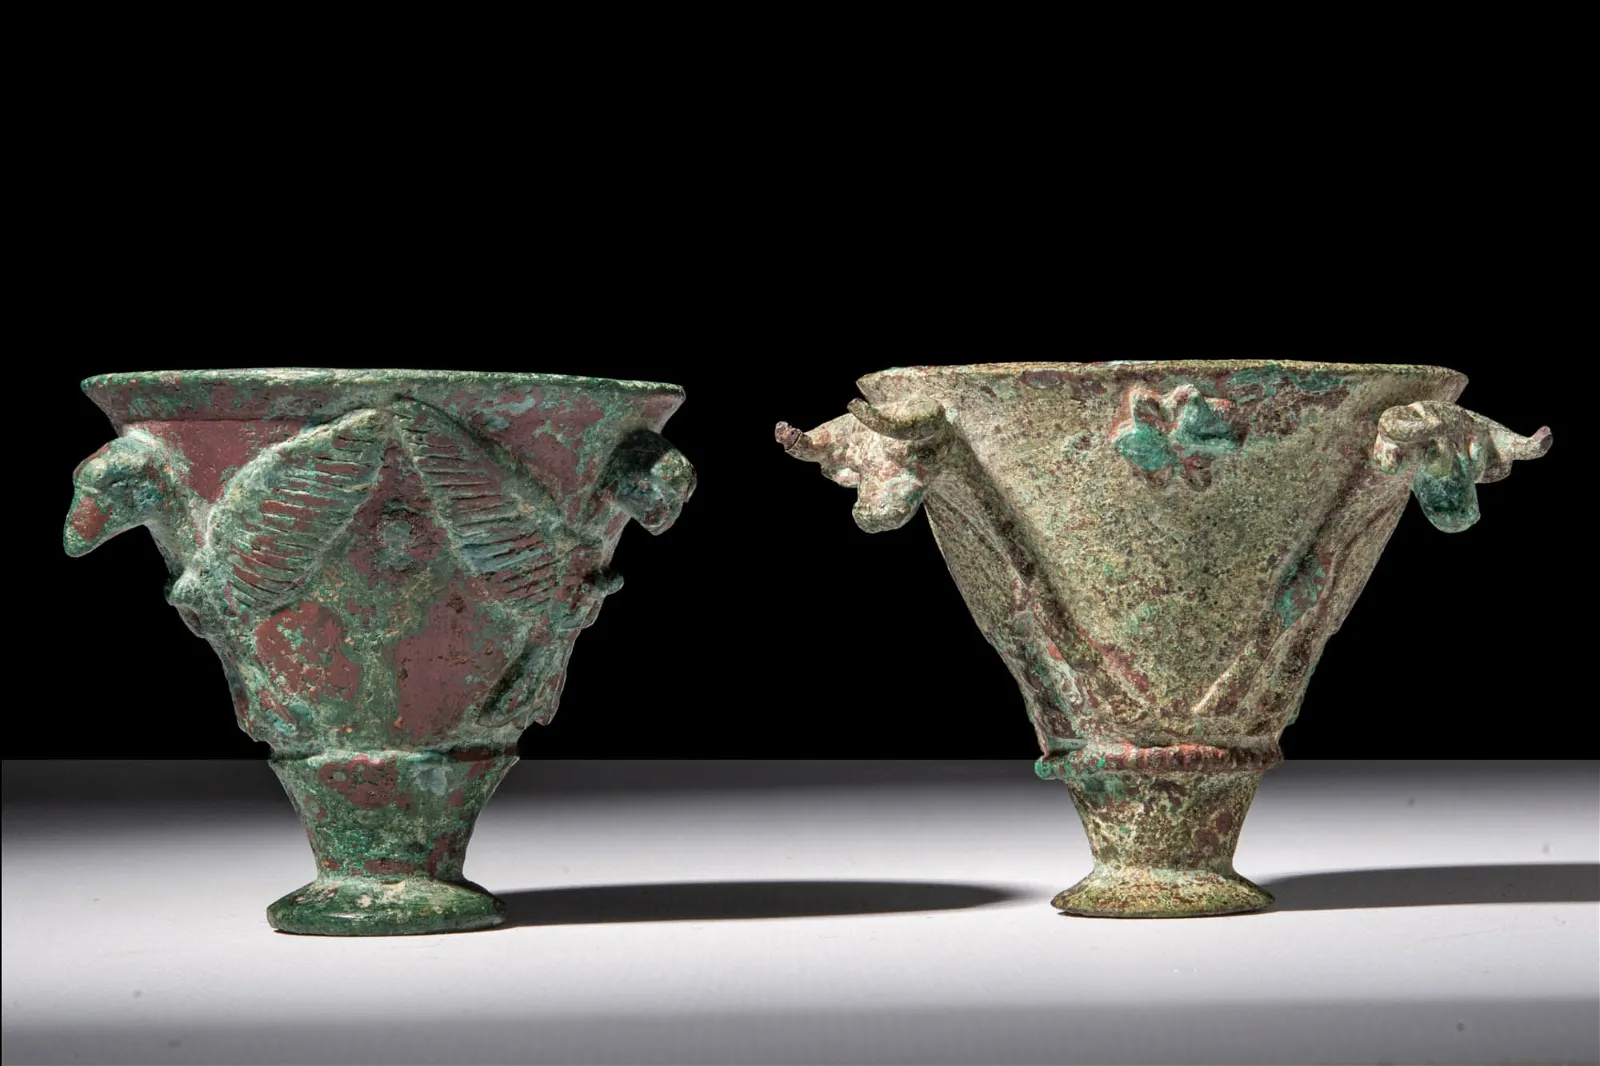 Sumerian Copper Decorated Cups With Animal Protomes, estimated at £40,000-£60,000 ($50,000-$75,000) at Apollo.